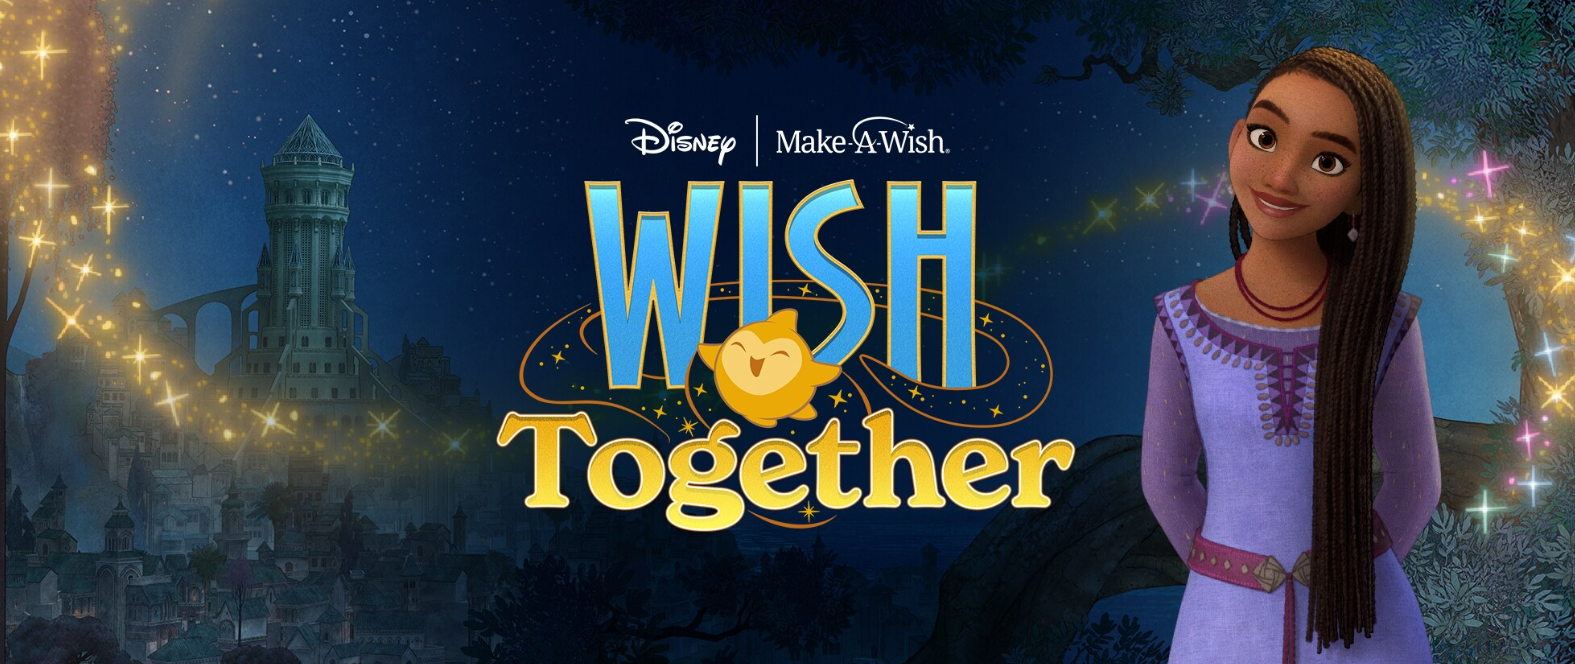 Disney and Make-A-Wish Launch Wish Together Campaign – The Nerds of Color